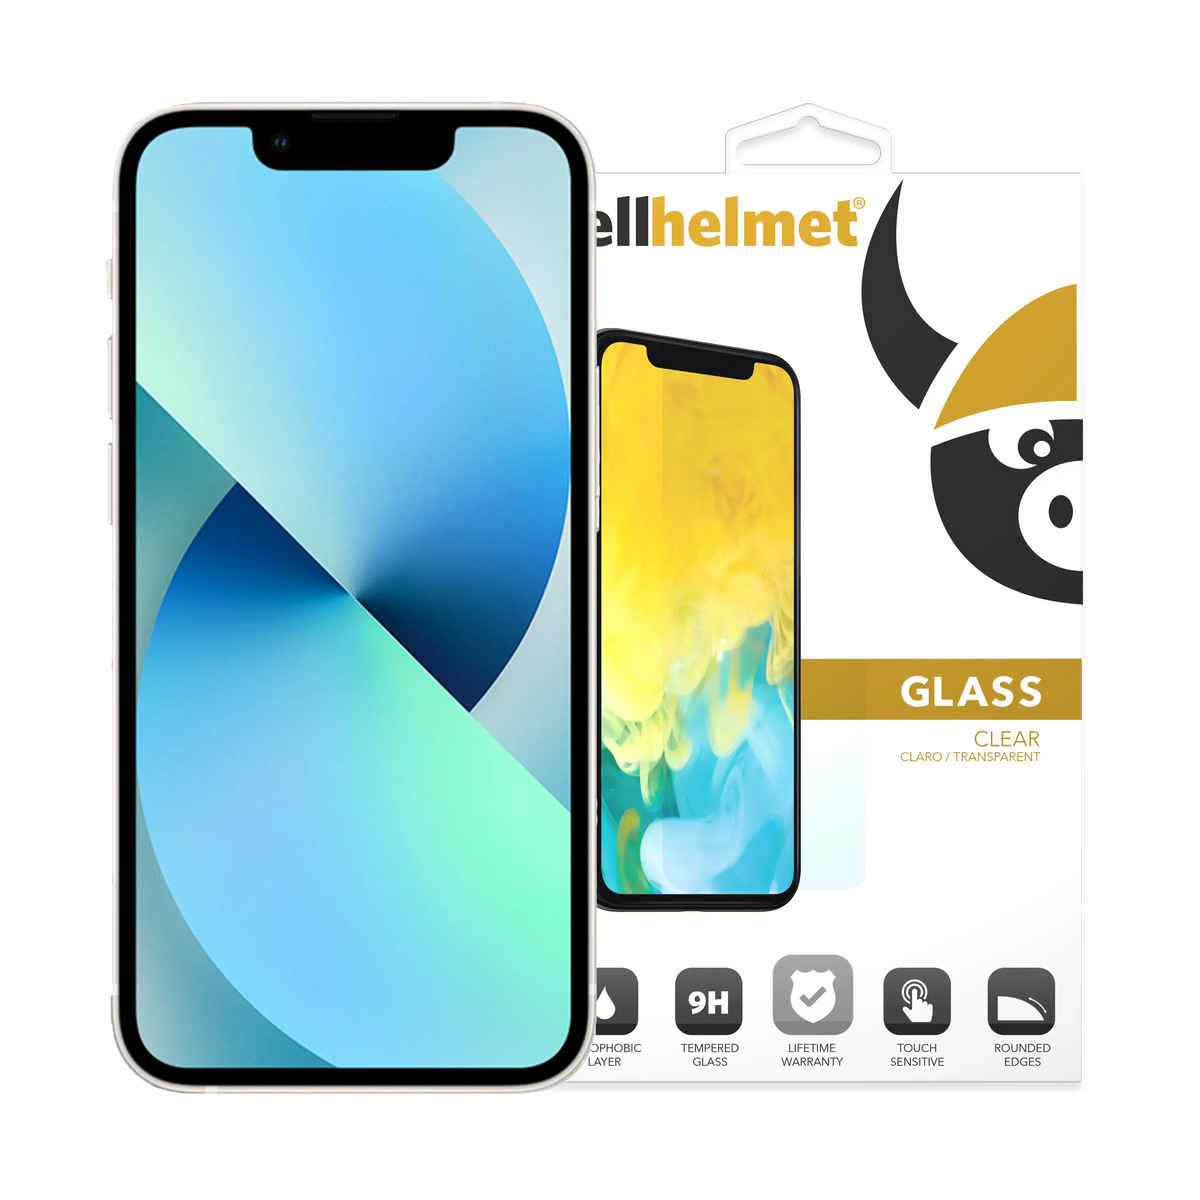 cellhelmet Tempered Glass for iPhone 13 Pro